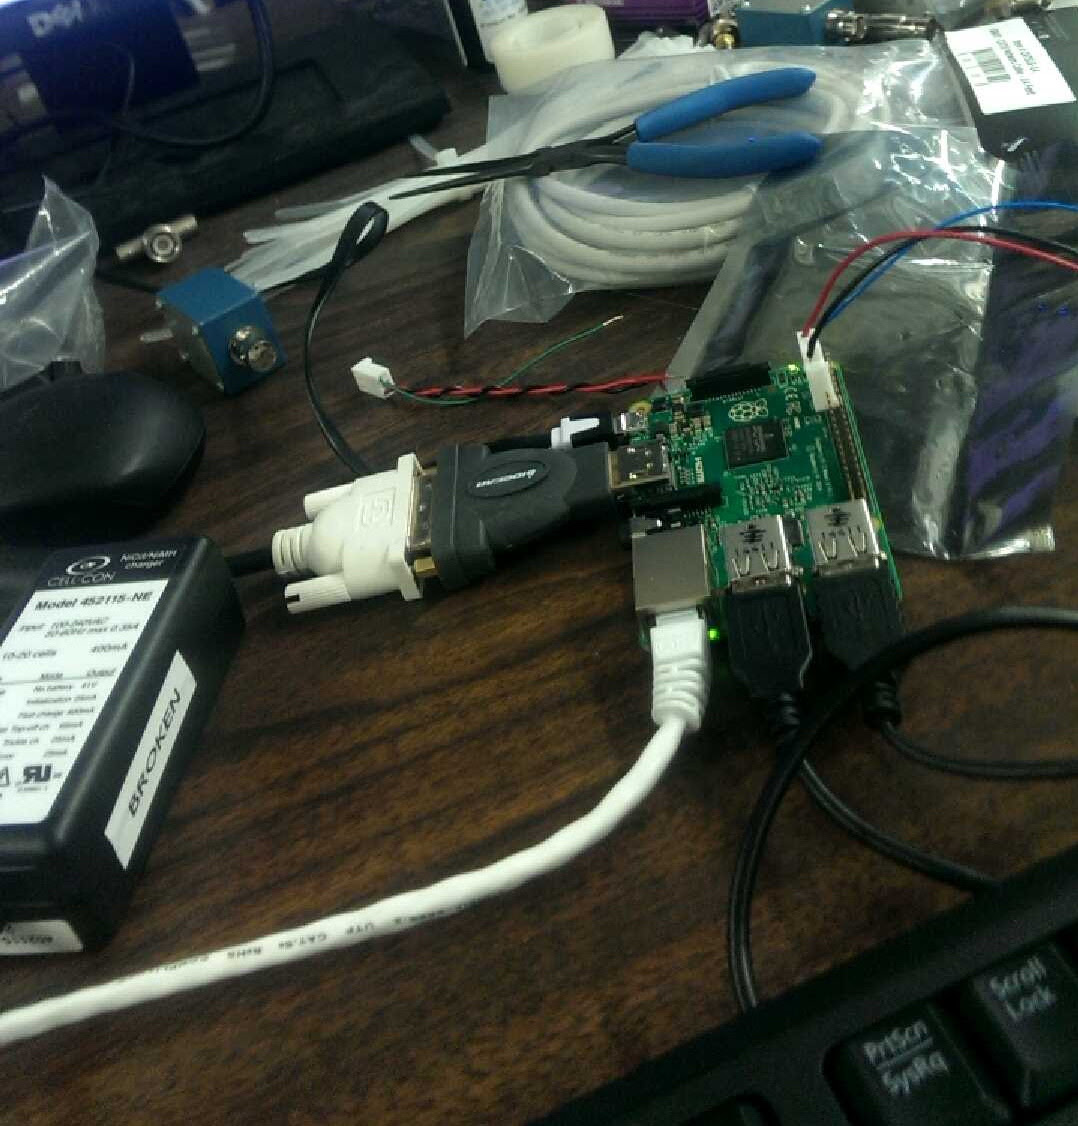 Raspberry pi on a cluttered desk in the lab